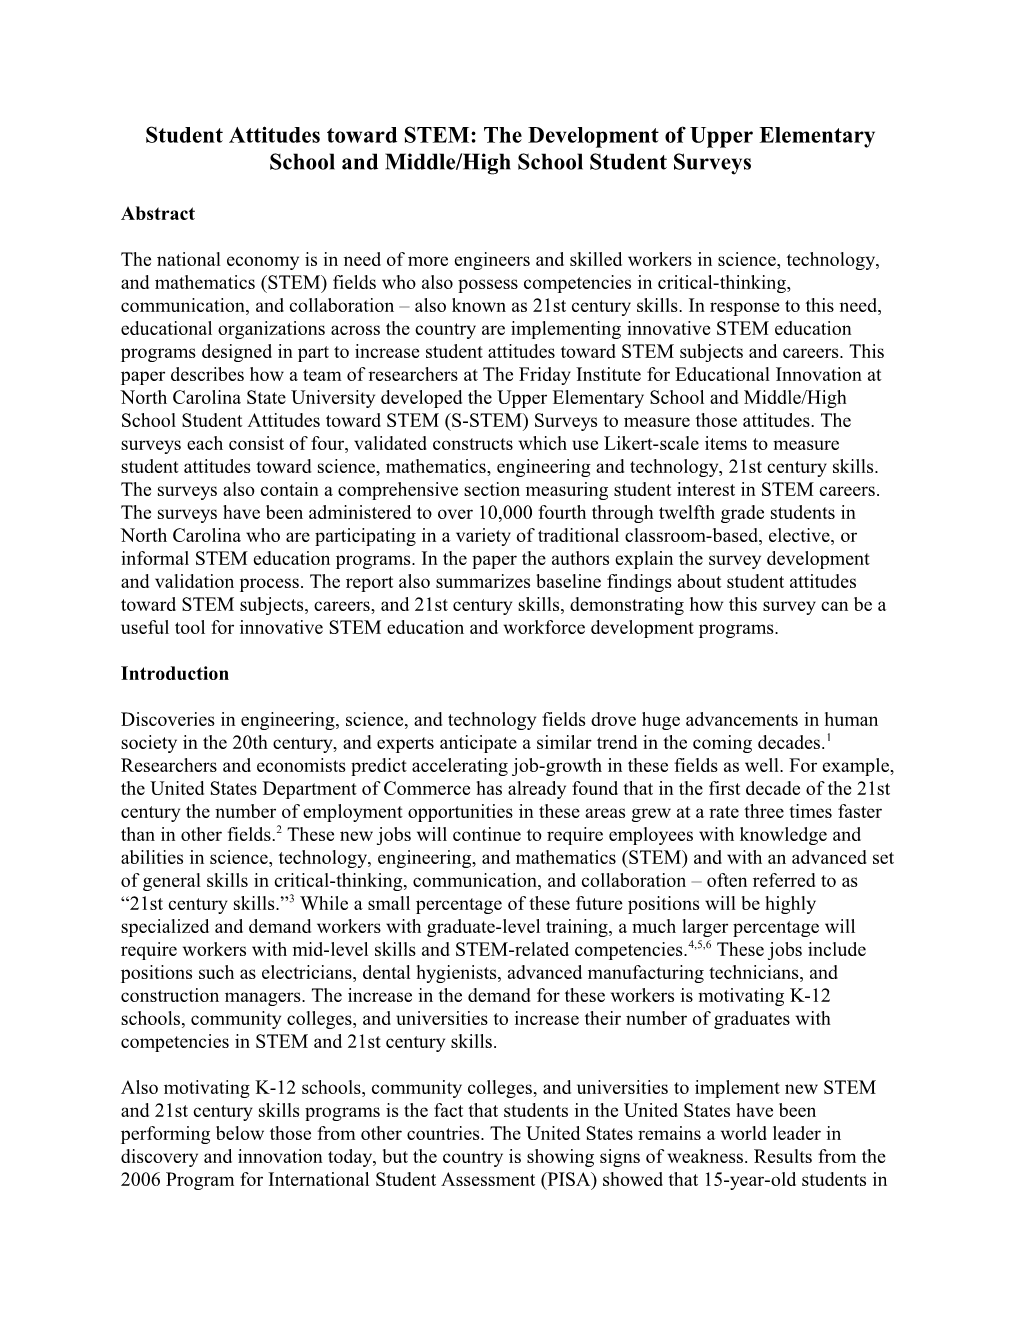 Student Attitudes Toward STEM: the Development of Upper Elementary School and Middle/High